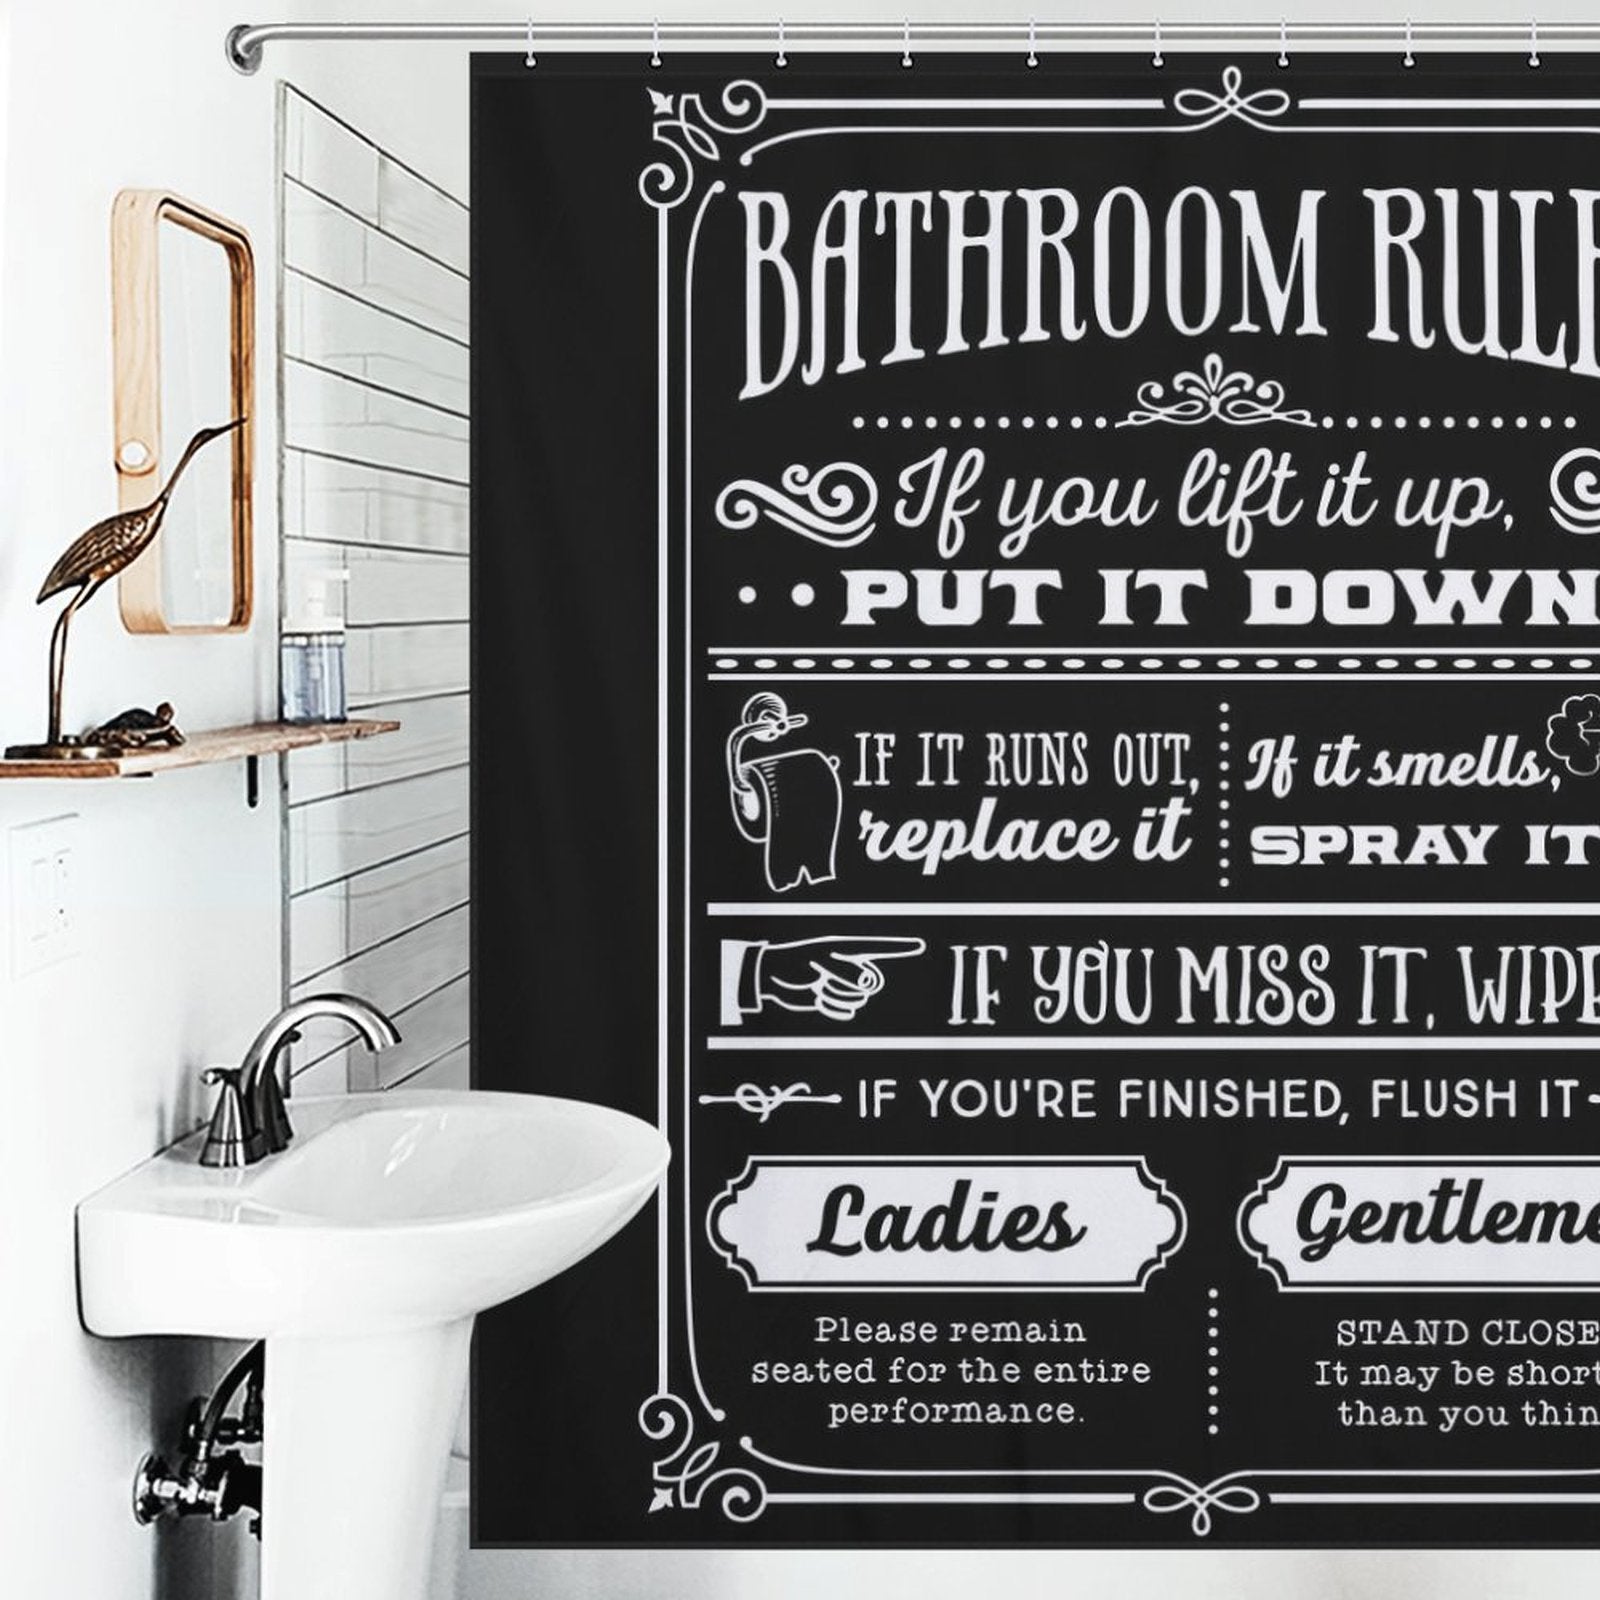 Funny Quotes Shower Curtain Black and White Fable Motto - Cottoncat with funny quotes and bathroom rules written in white text, such as "If you sprinkle when you tinkle, be a sweetie and wipe the seatie," hanging in a white-tiled bathroom with a sink and mirror. Made from durable polyester fabric, it adds a touch of black and white fable motto style.